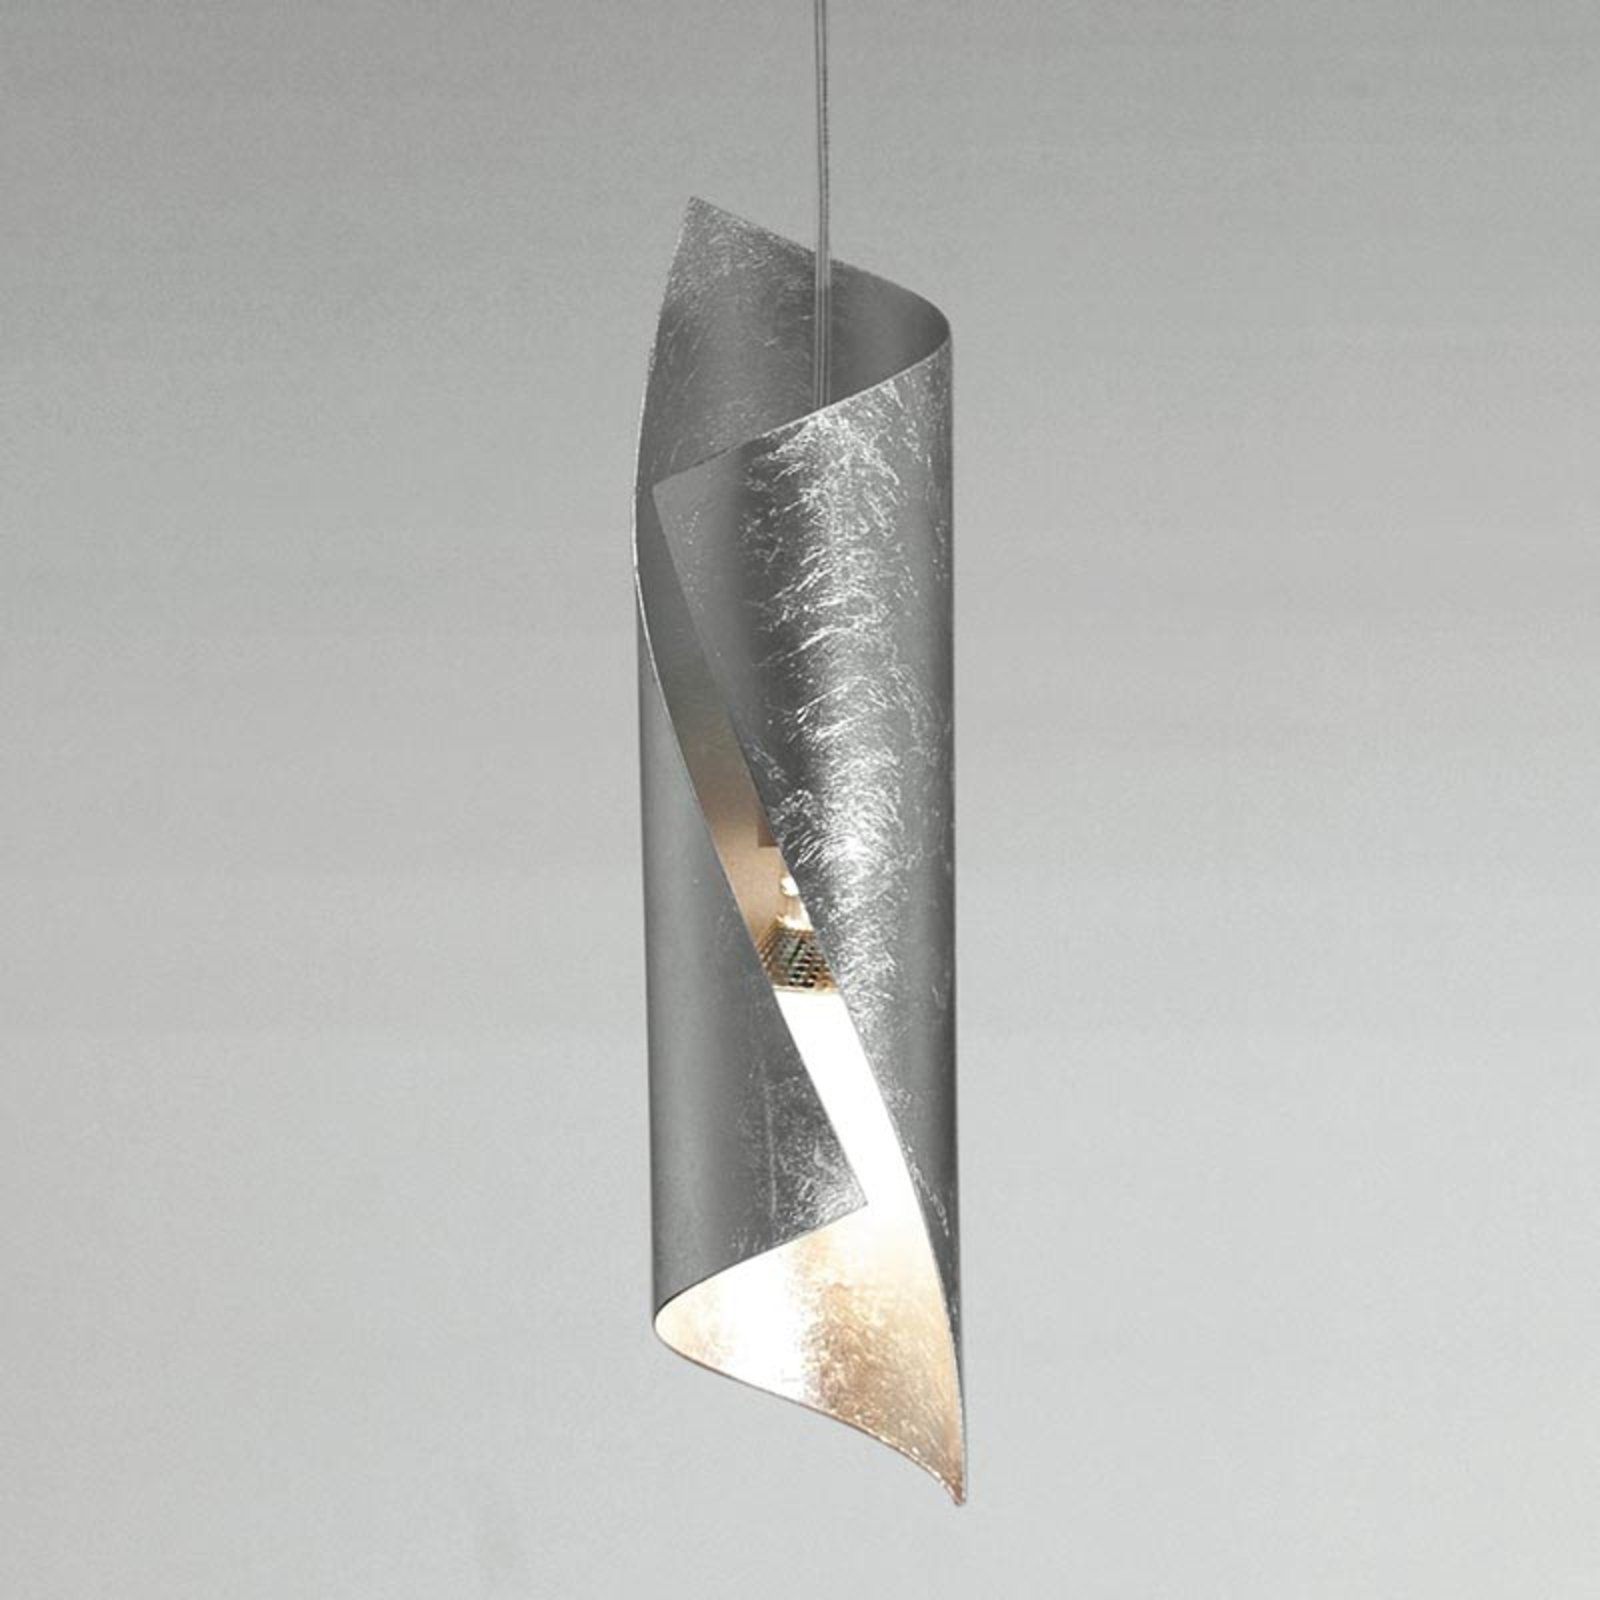 Knikerboker Hué hanging light in silver, one-bulb